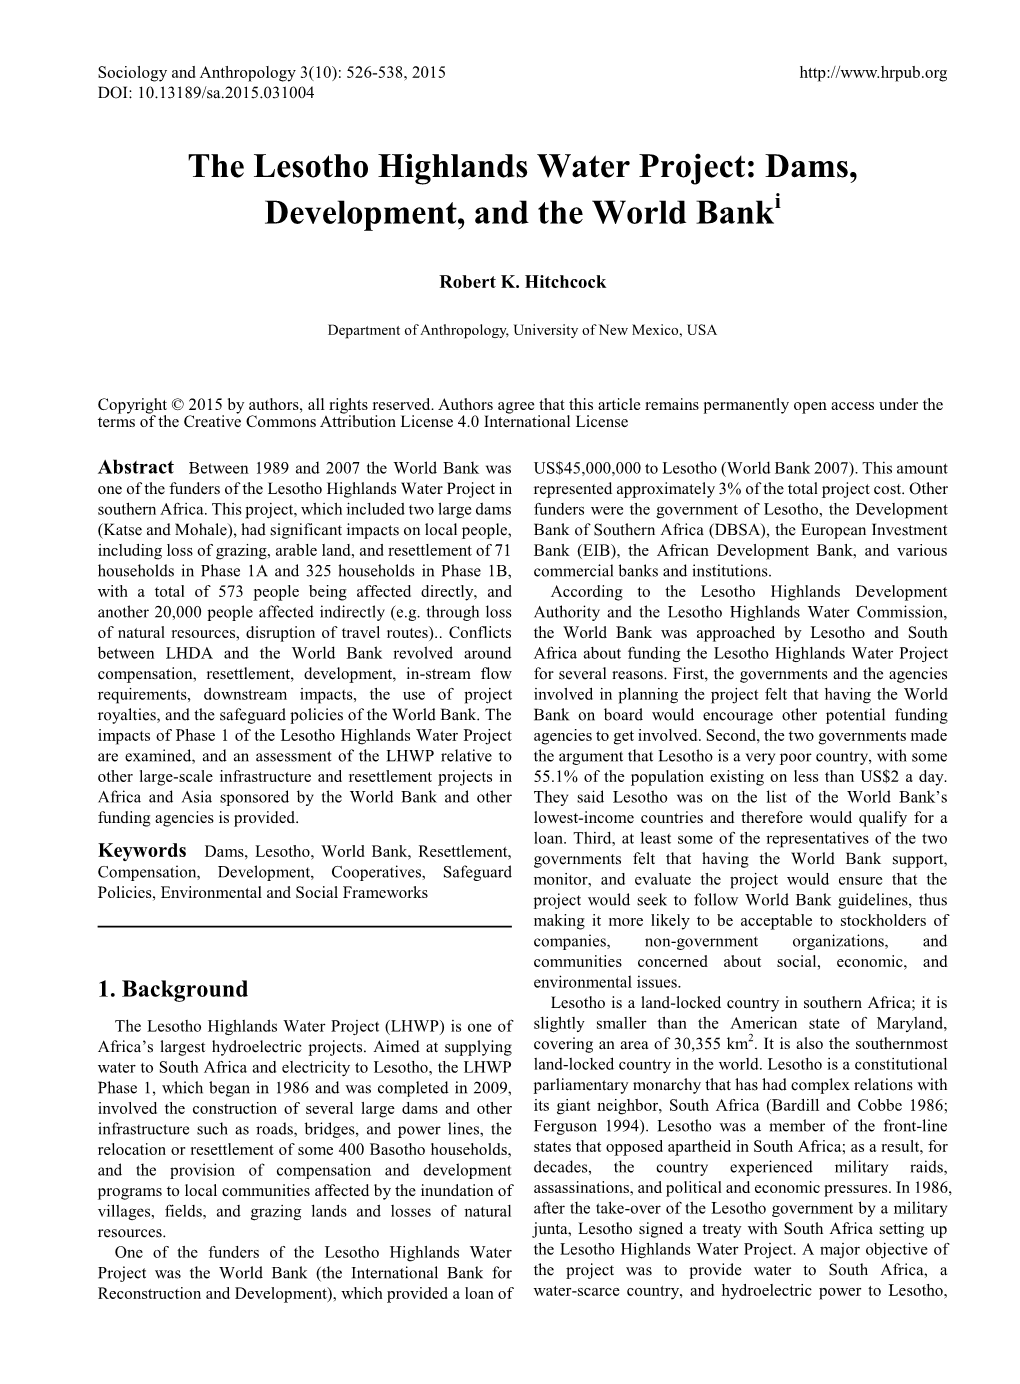 The Lesotho Highlands Water Project: Dams, Development, and the World Banki